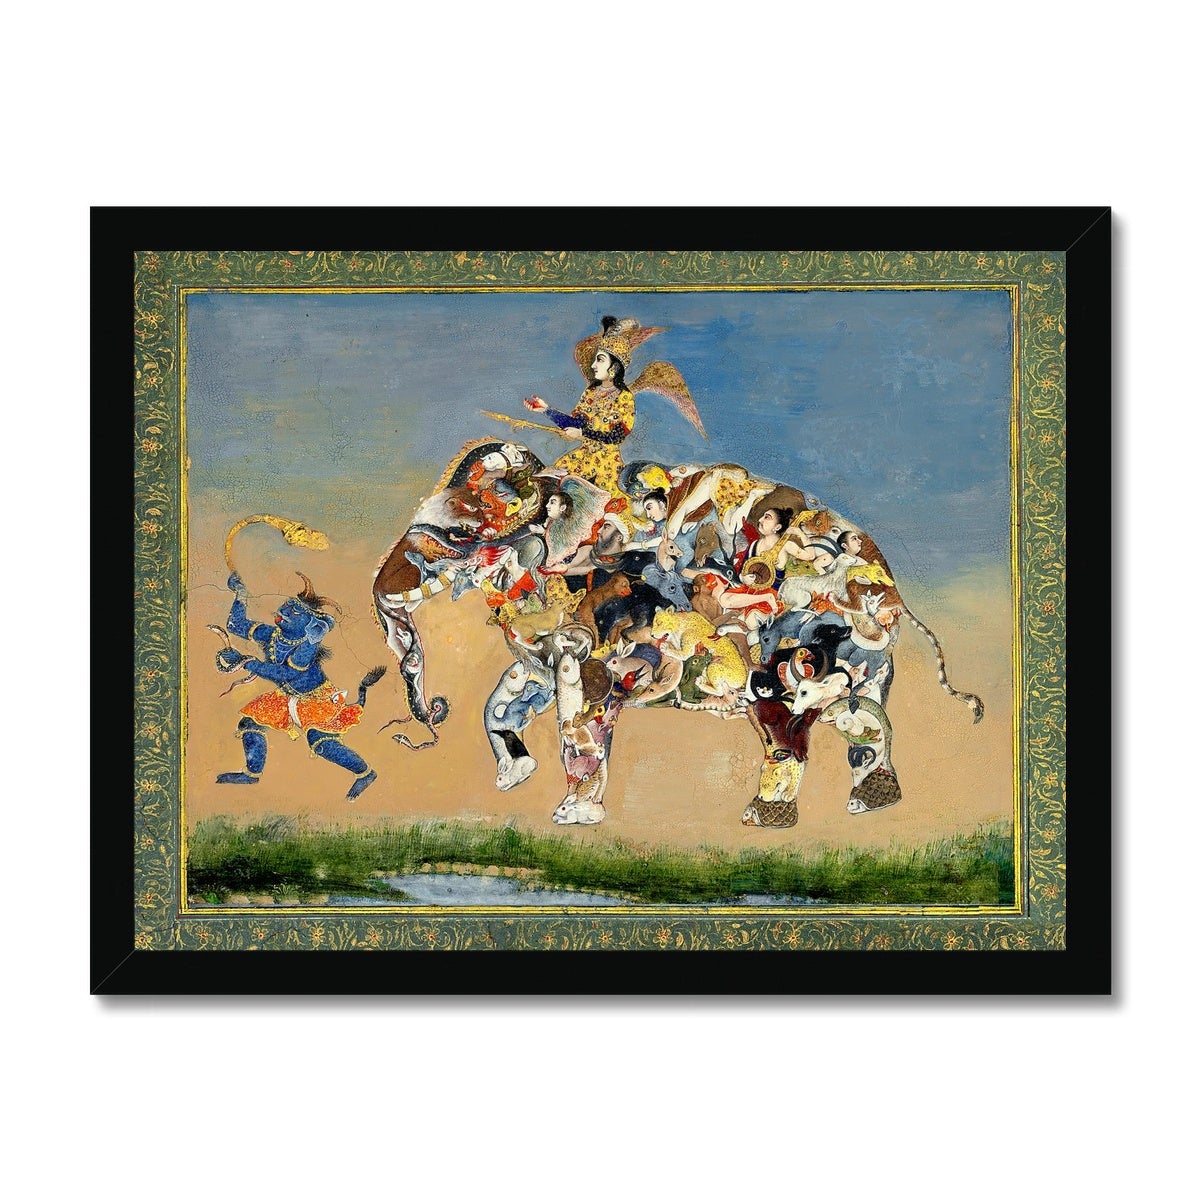 Framed Print Composite Indian Elephant: 19th Century |  Gold Buddhist Asian Persian Mughal Style Framed Art Print